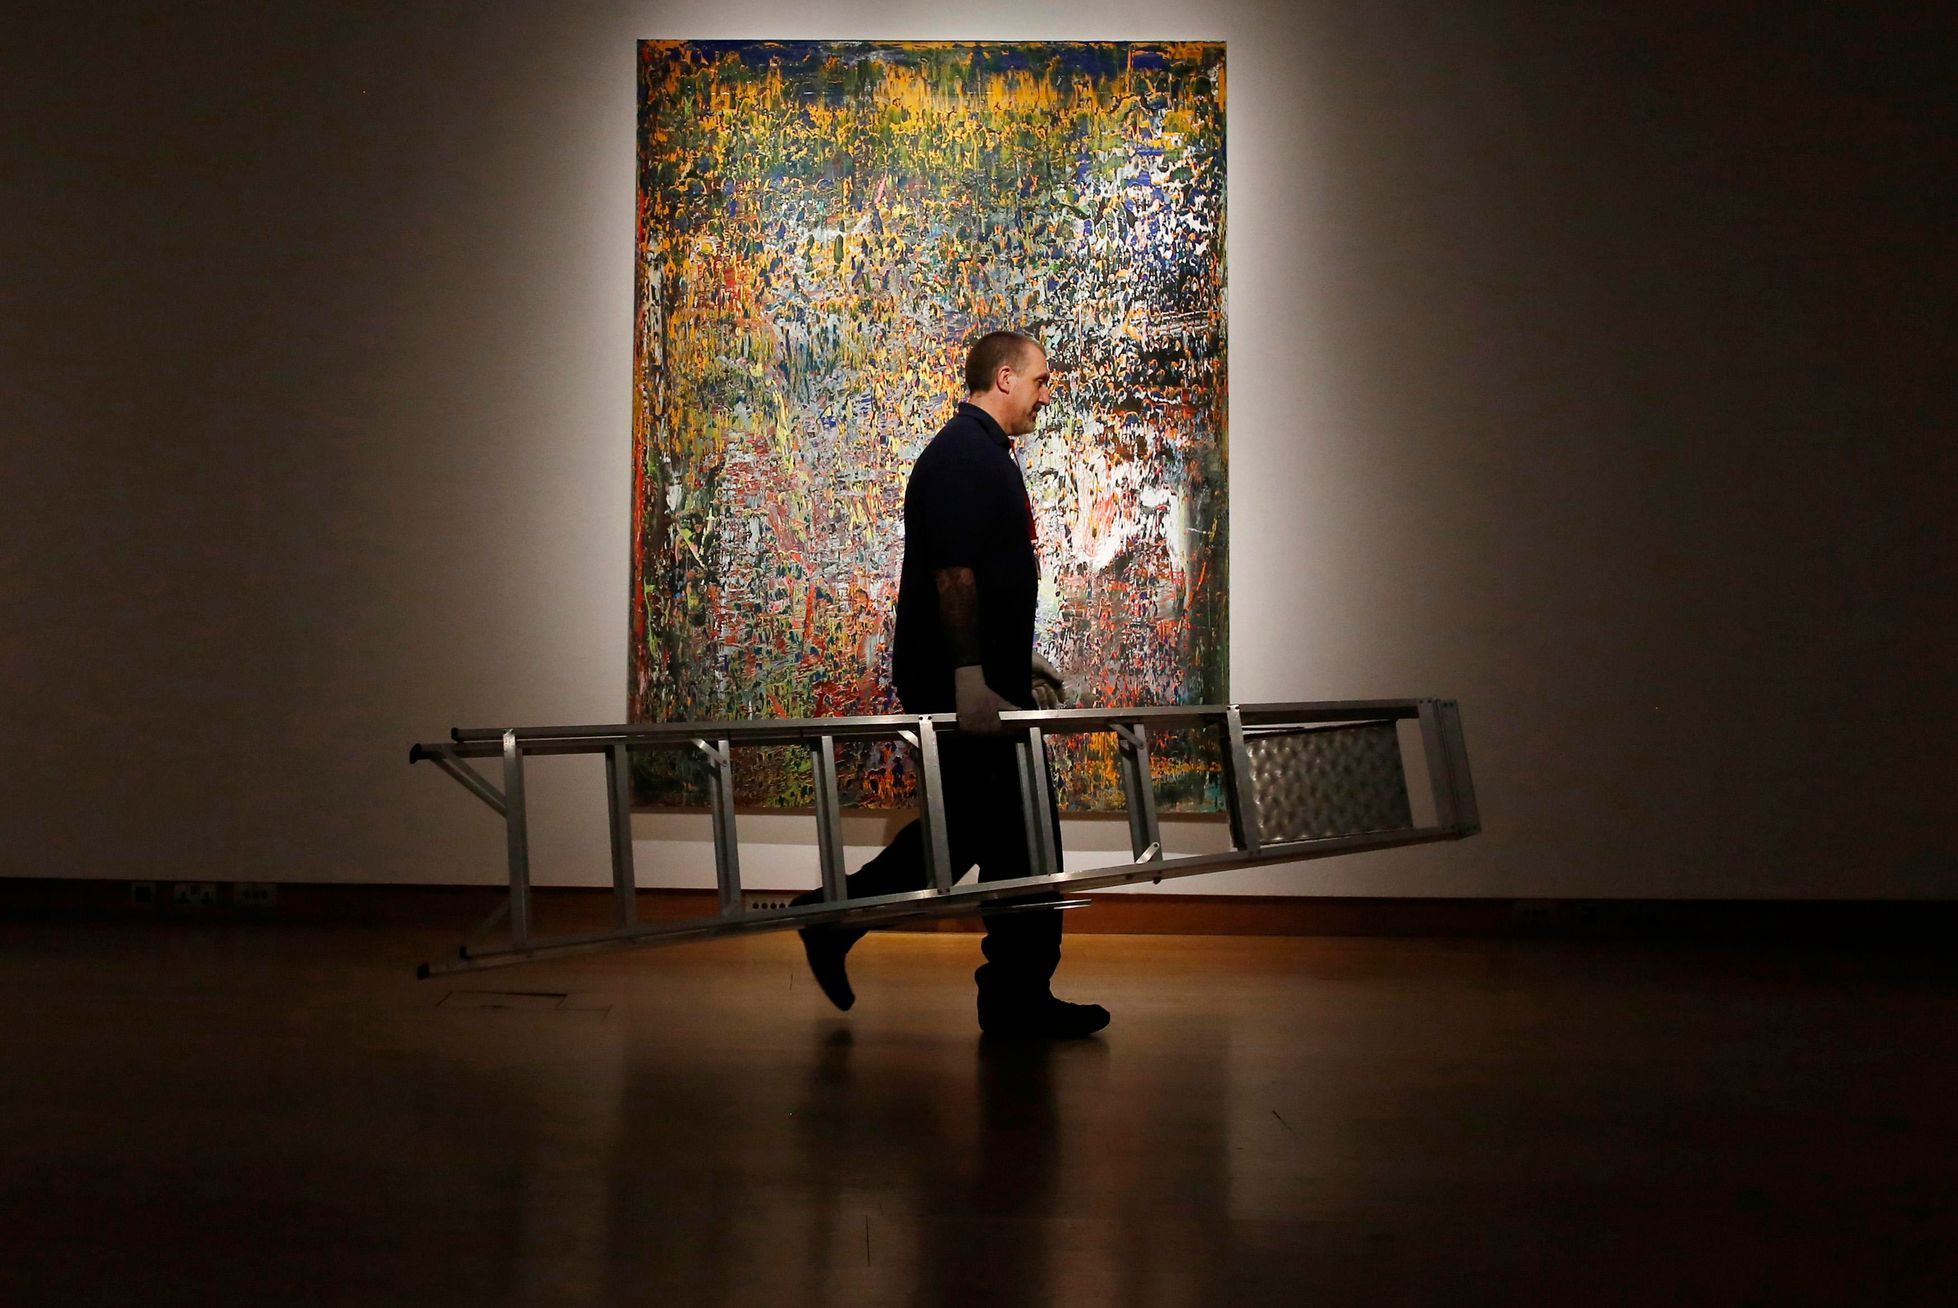 A man carries a ladder past &quot;Abstraktes Bild&quot; by Gerhard Richter in 1989  on display at Christie's in London